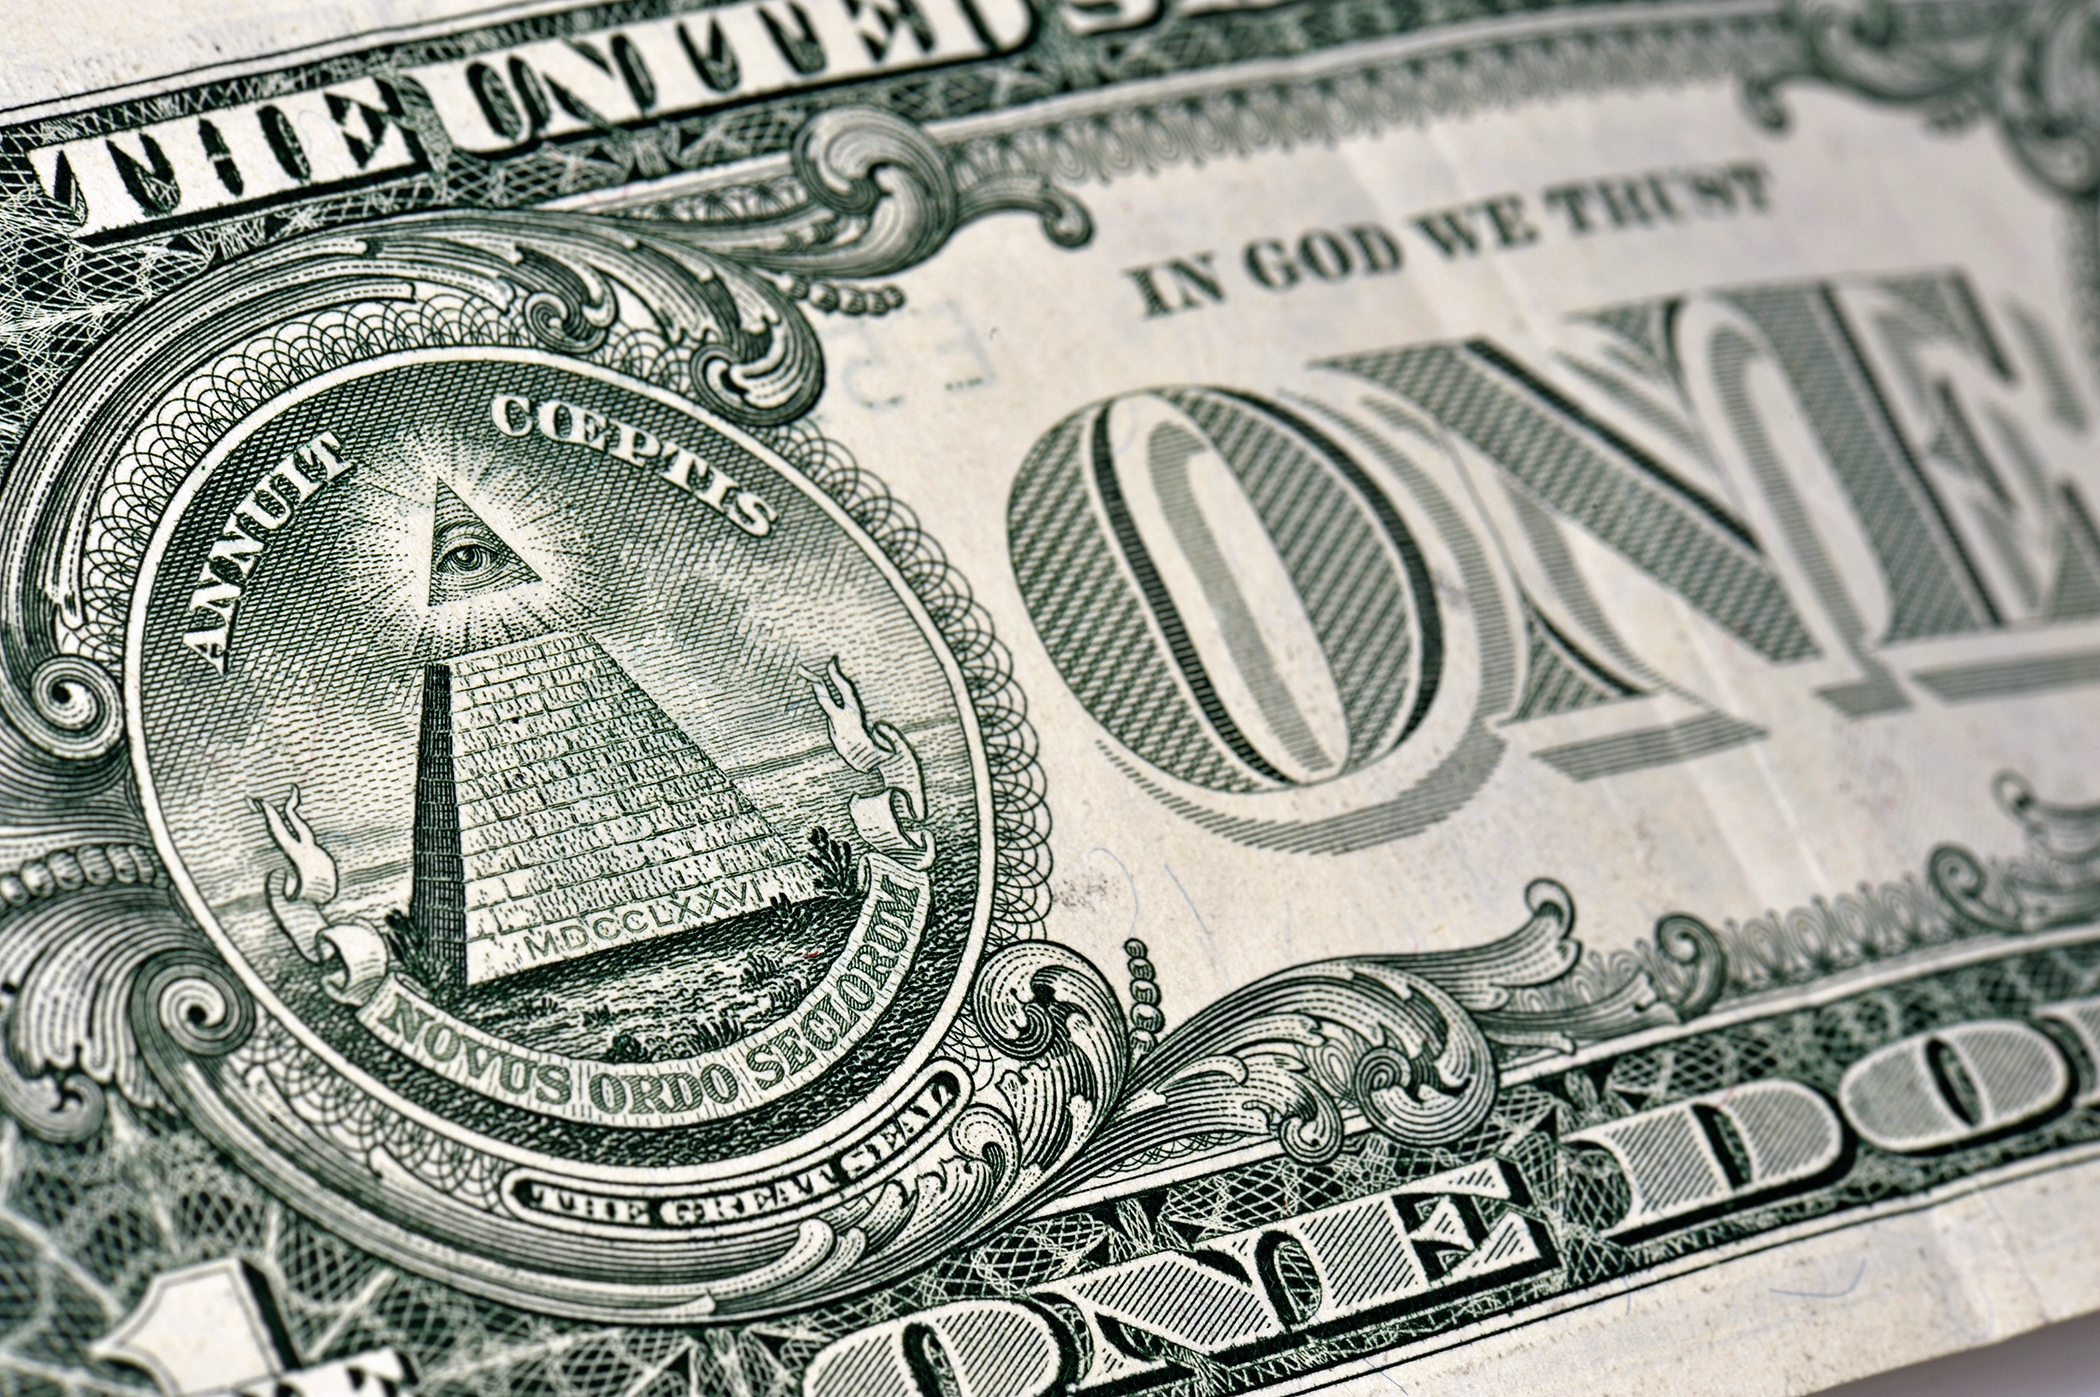 10 Things You Didn't Know About the $1 Bill